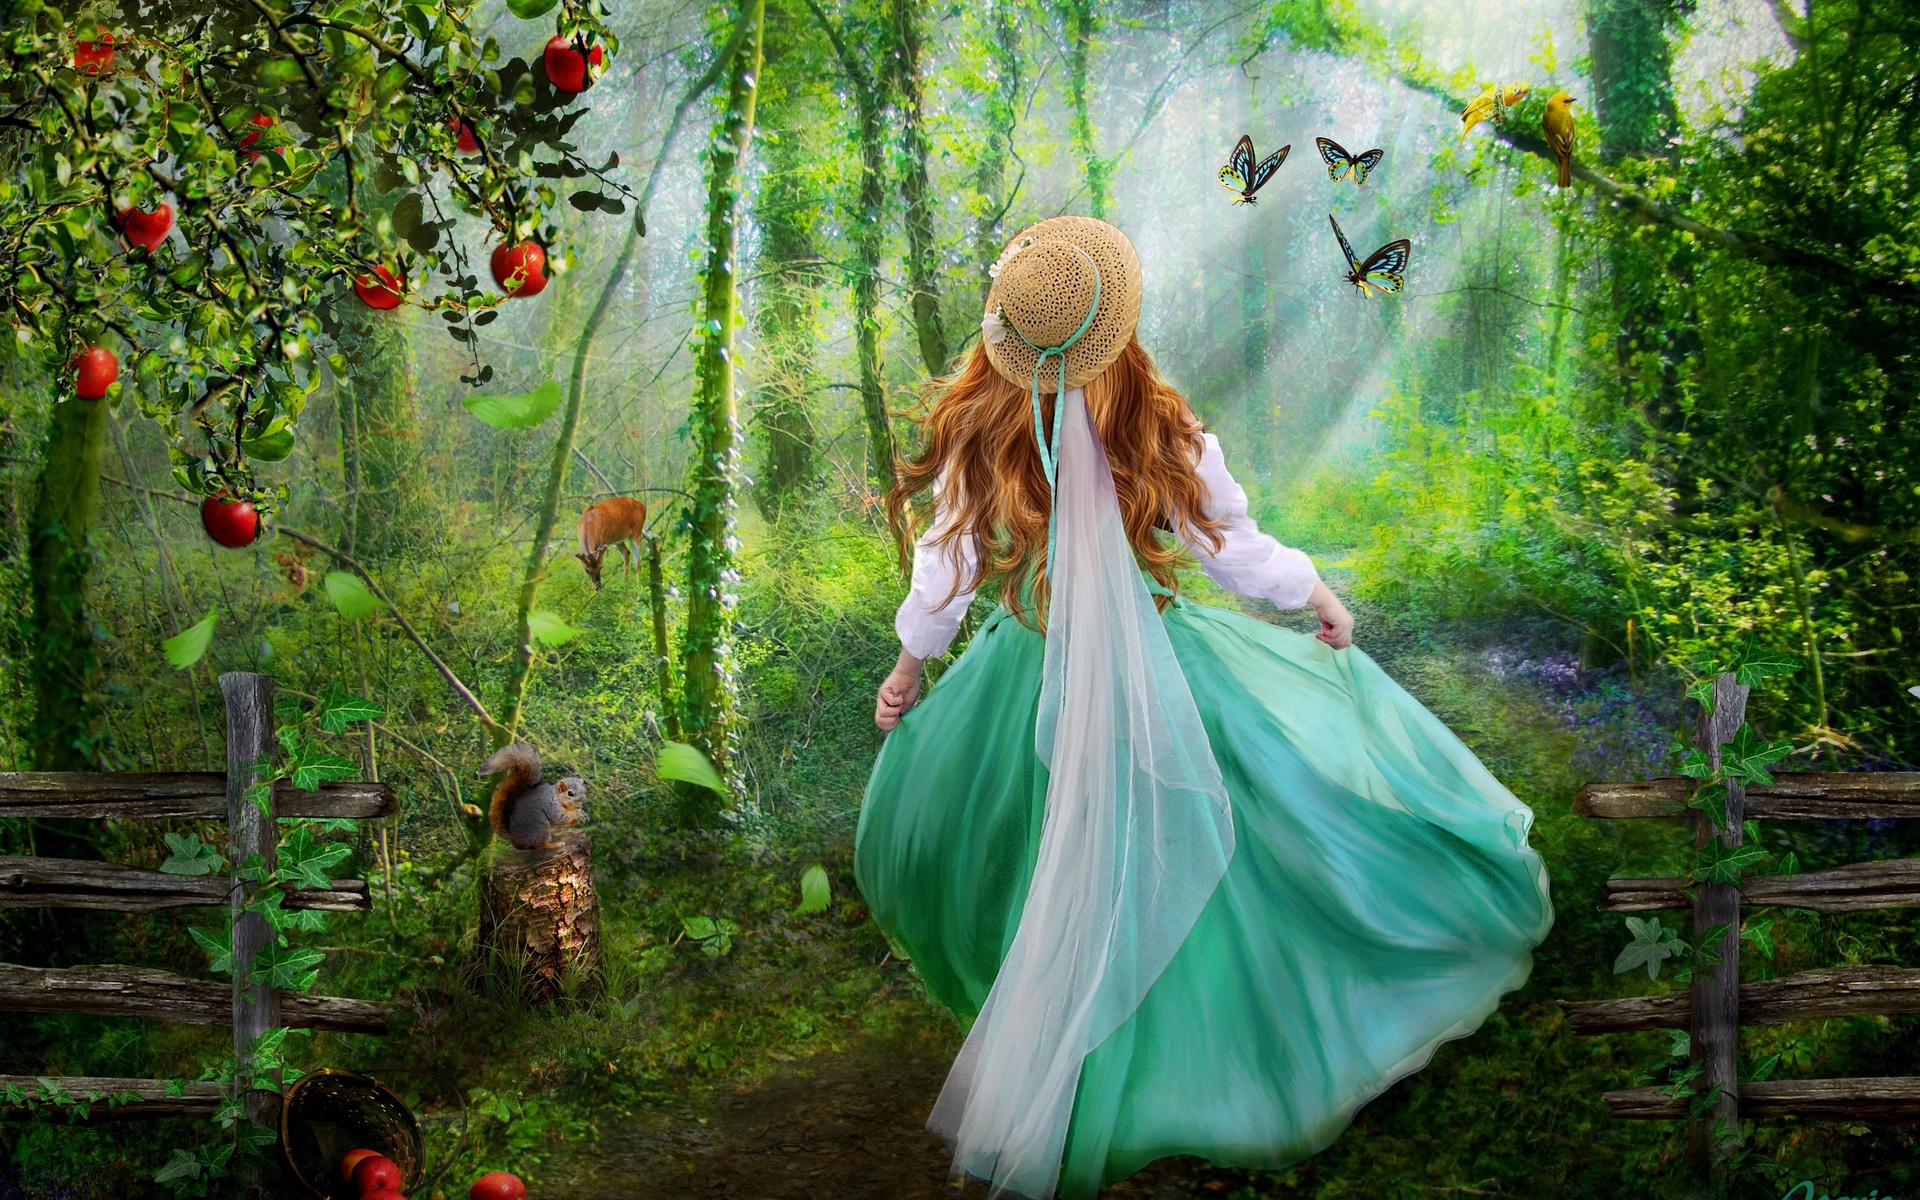 fantasy, Cg, Digital art, Manipulations, Photography, Artistic, Cute, Trees, Forest, Magical, Children, Mood, Happy, Emotions, Animals, Girls, Gowns, Butterflies, Soft Wallpaper